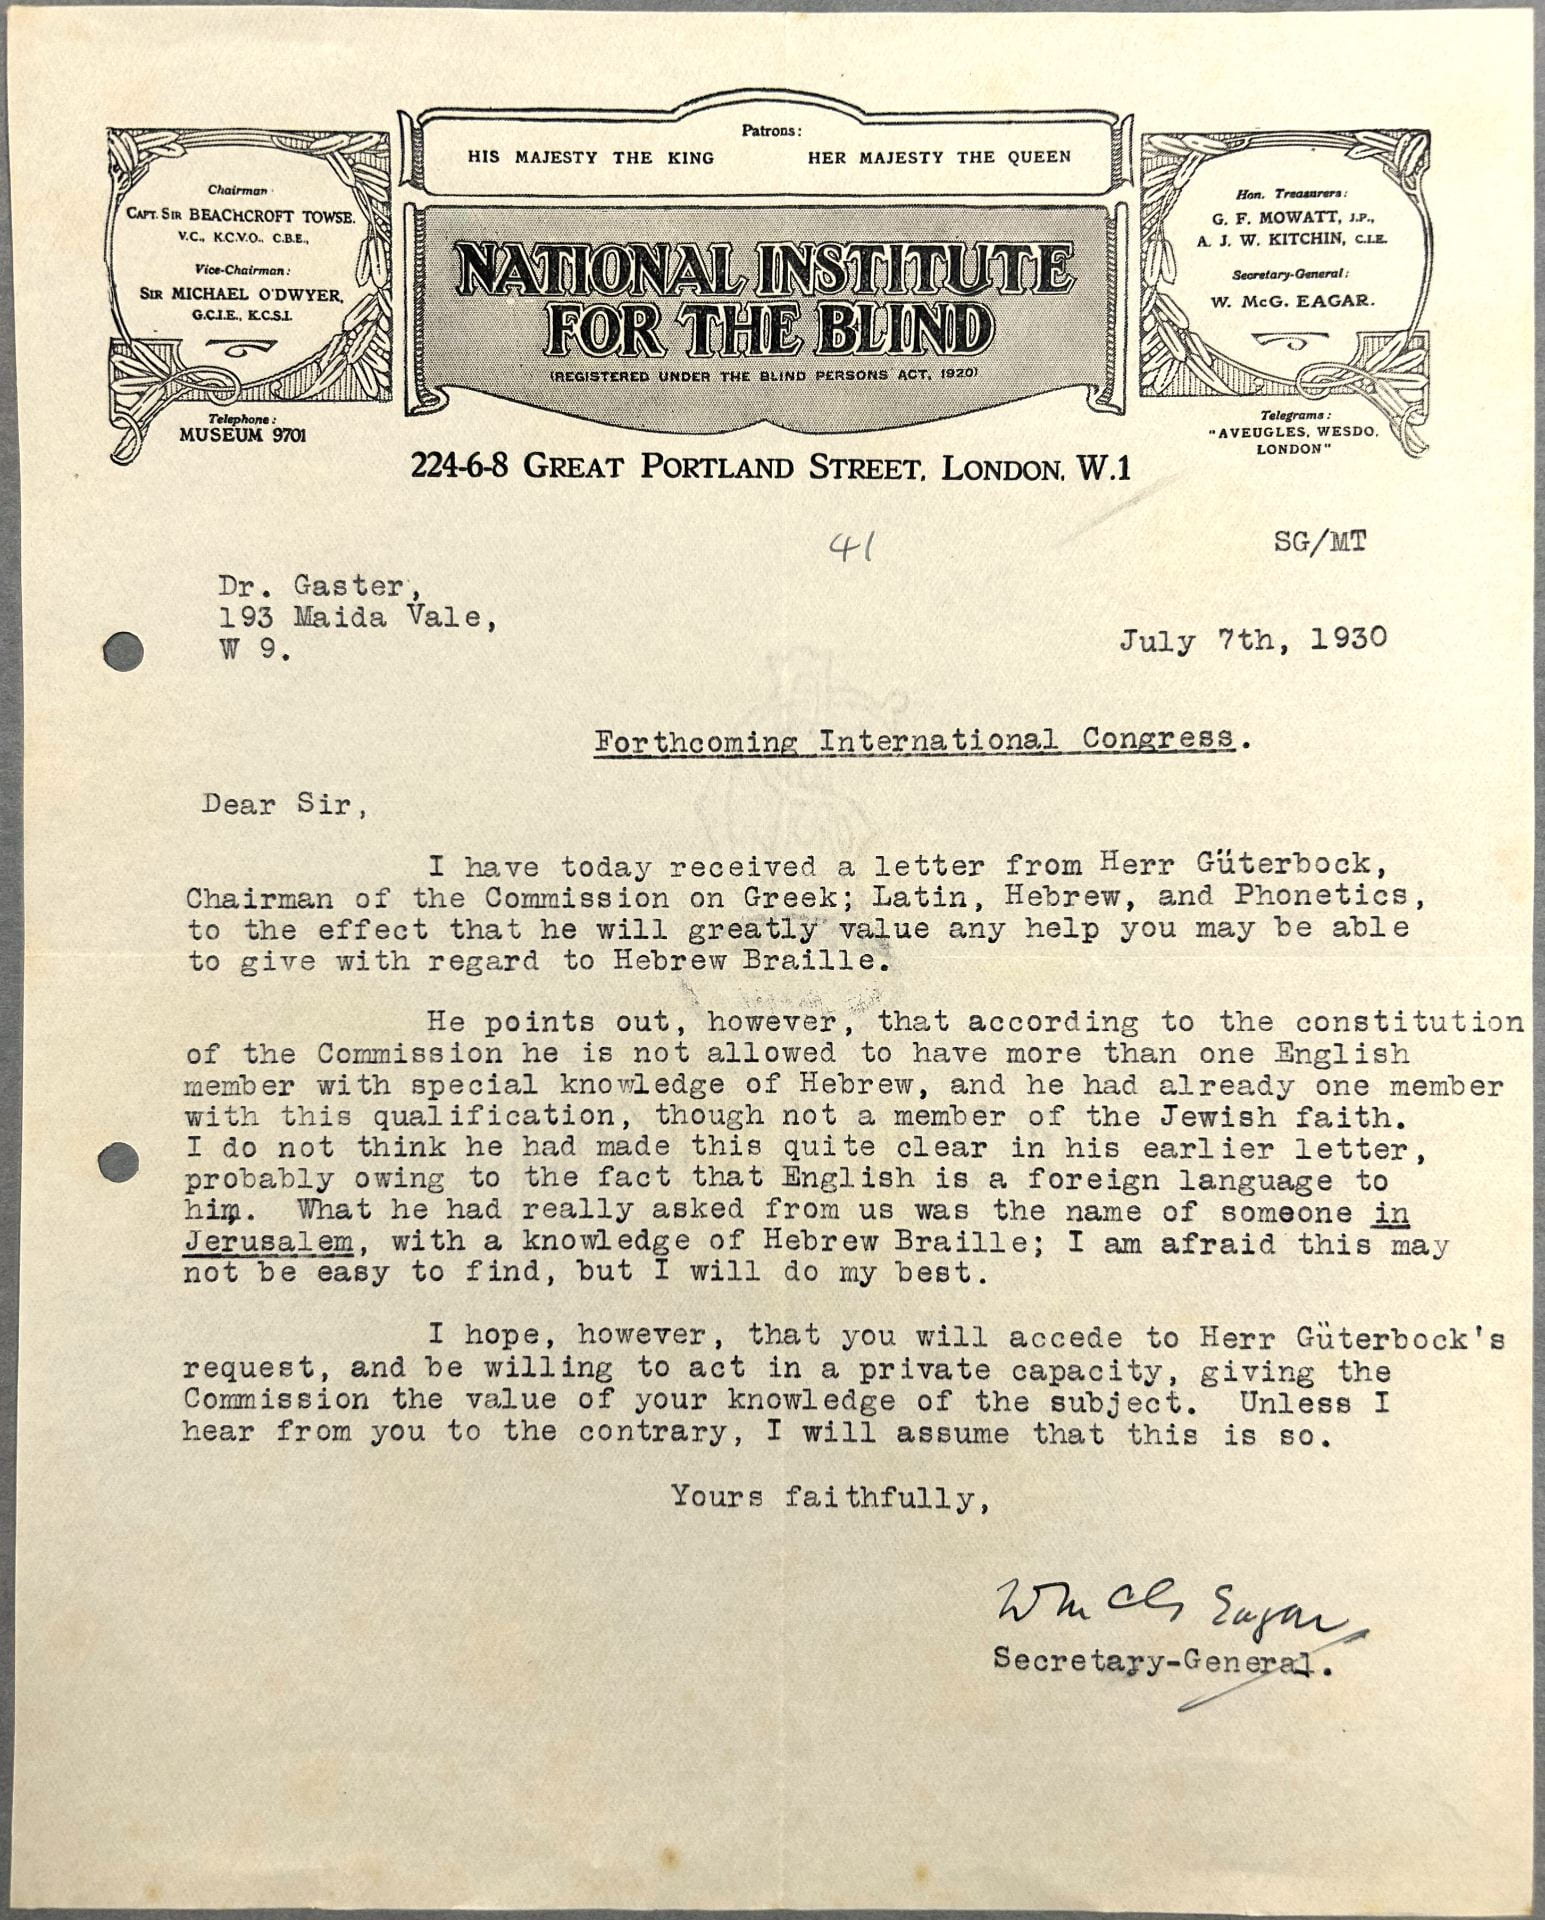 Letter from the National Insitute of the Blind asking Gaster to continue to provide them with the benefit of his knowledge and experience.